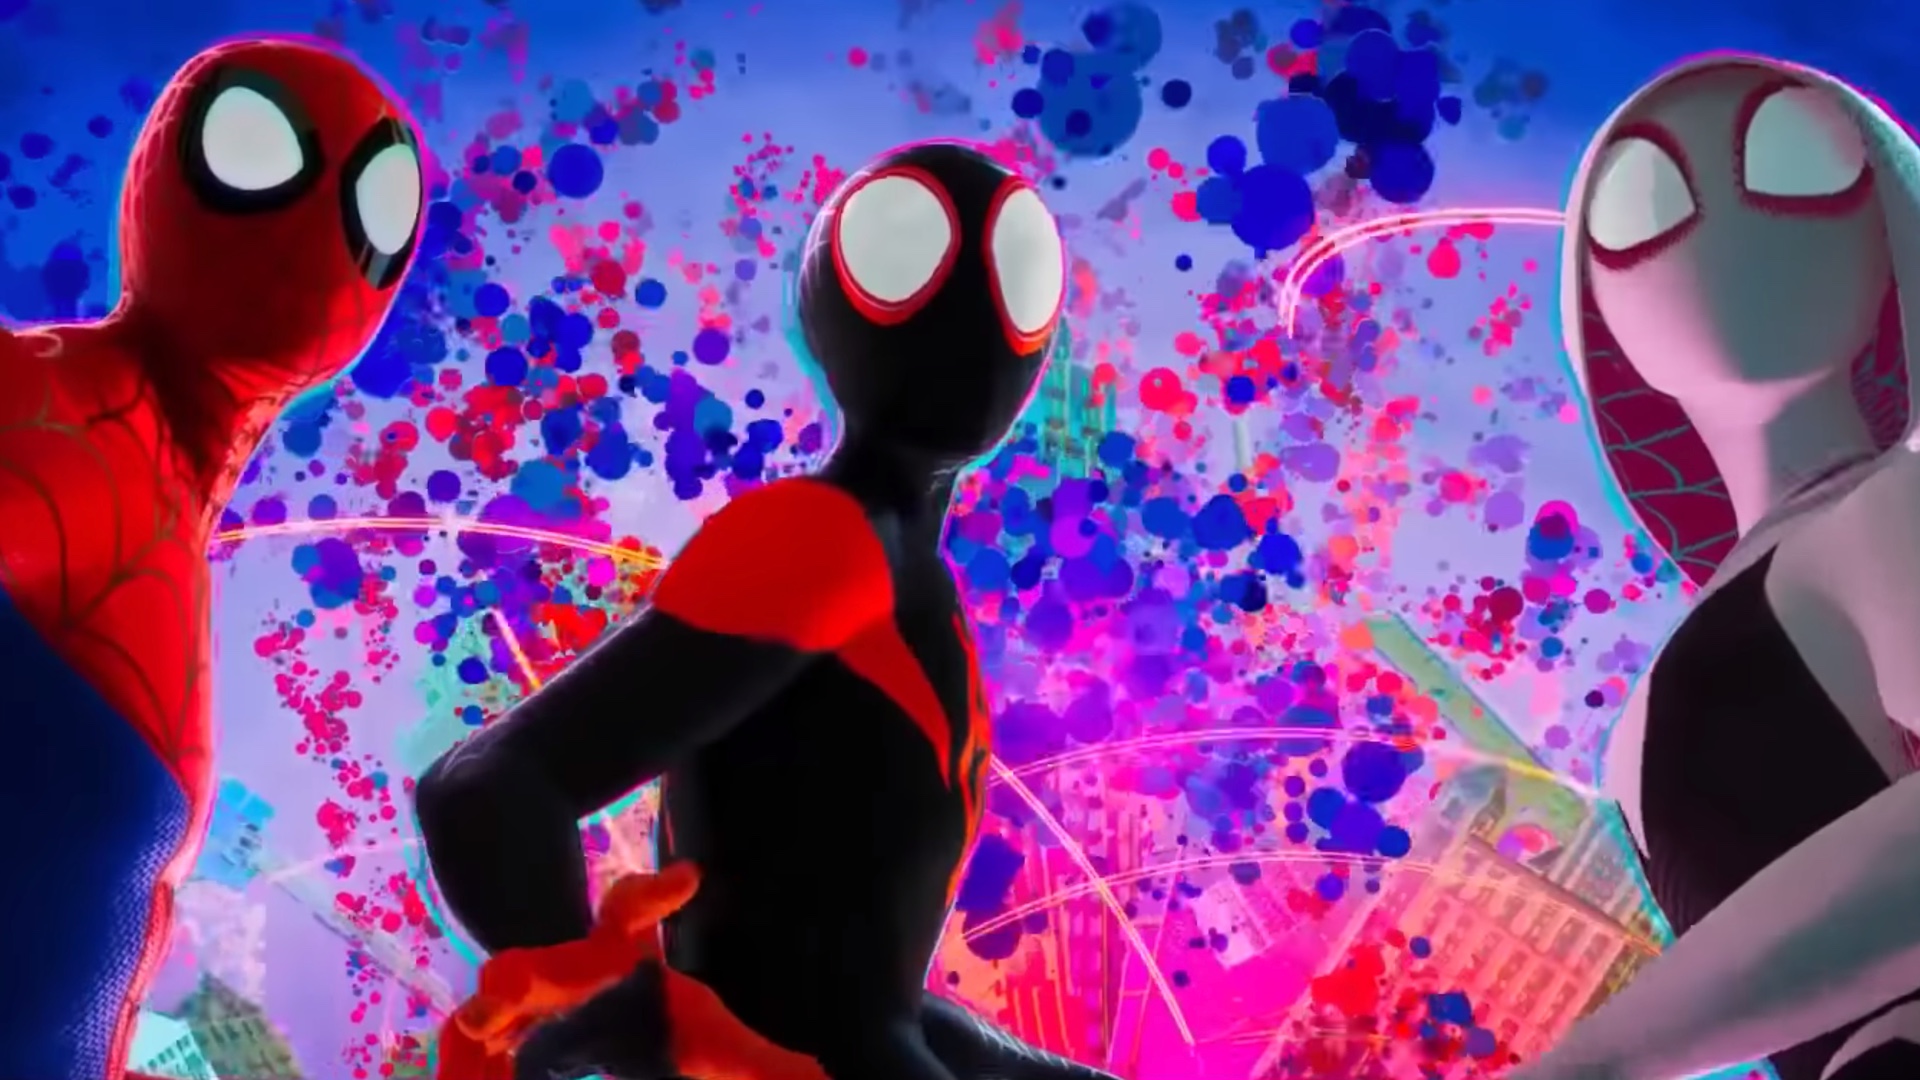 When Will Spider-Man: Into The Spider-Verse Come To Disney+? 